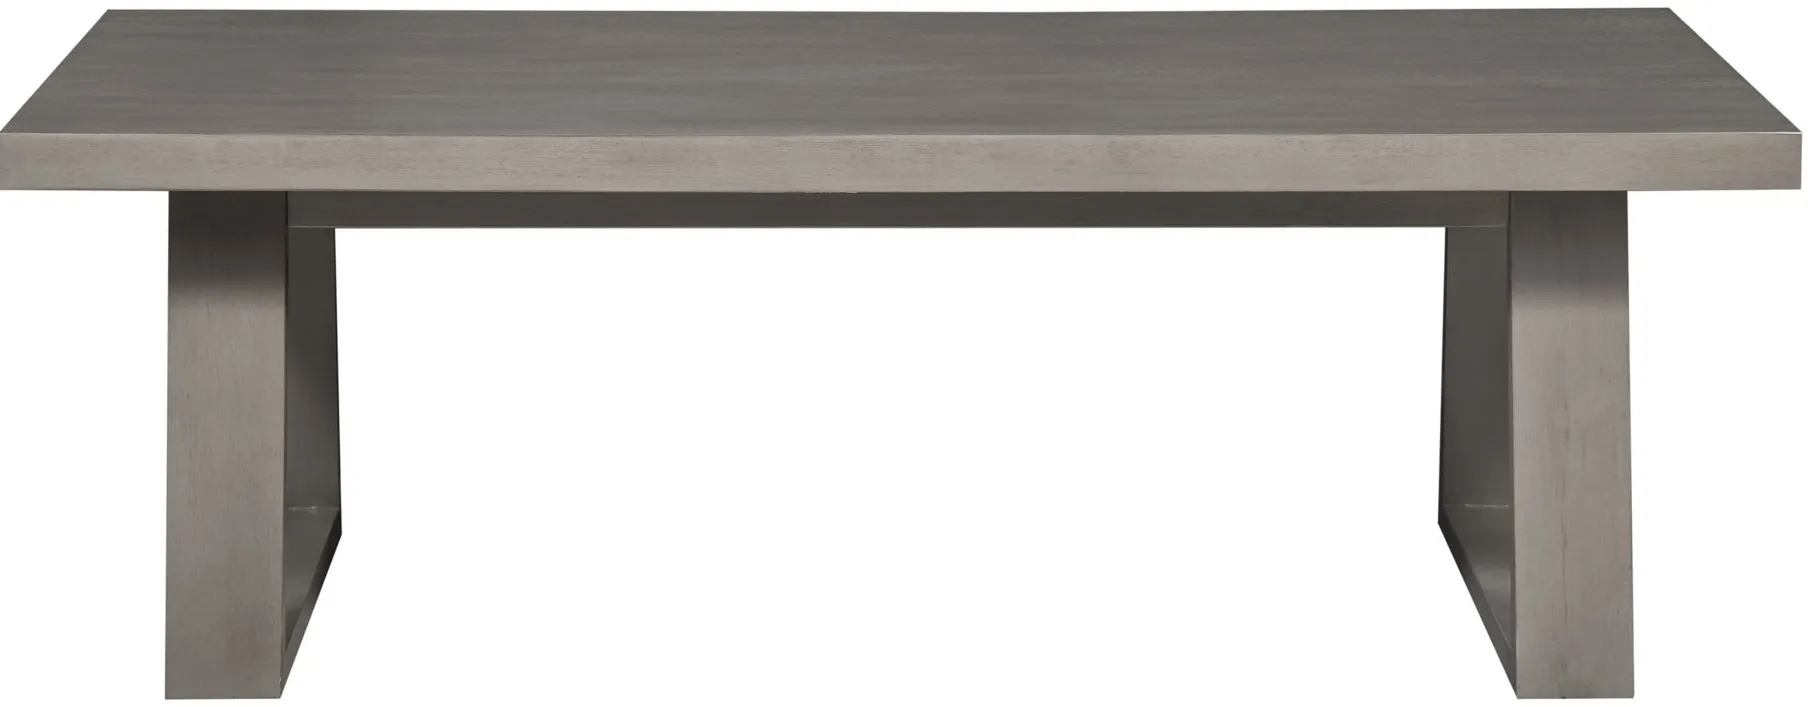 May Coffee Table in Gray by Unique Furniture